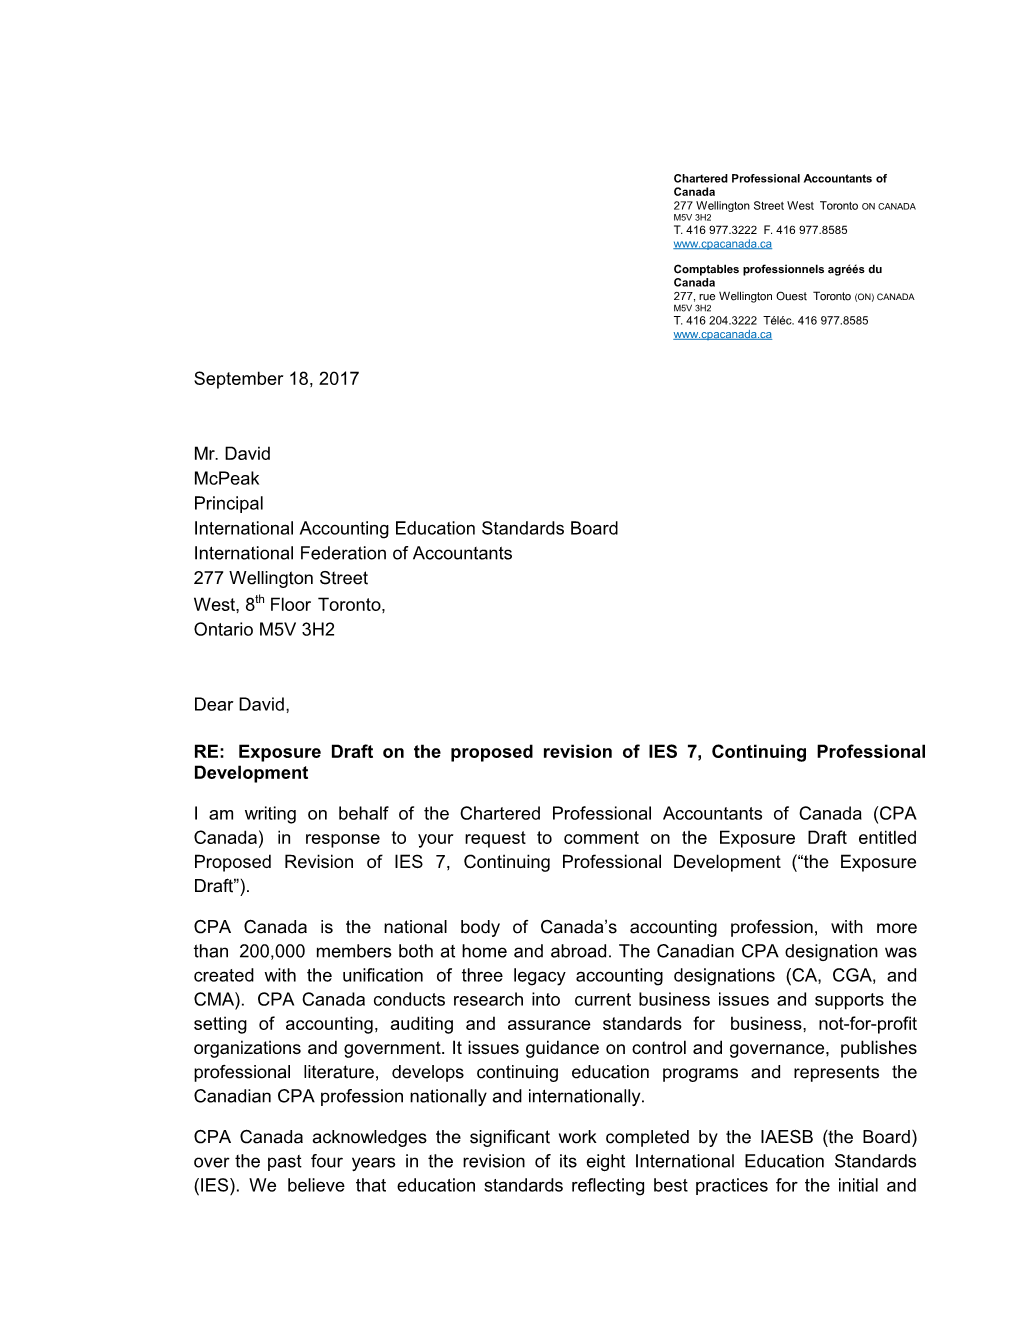 CPA Canada's Response to IAESB's Proposed IES Continued Professional Development (Revised)